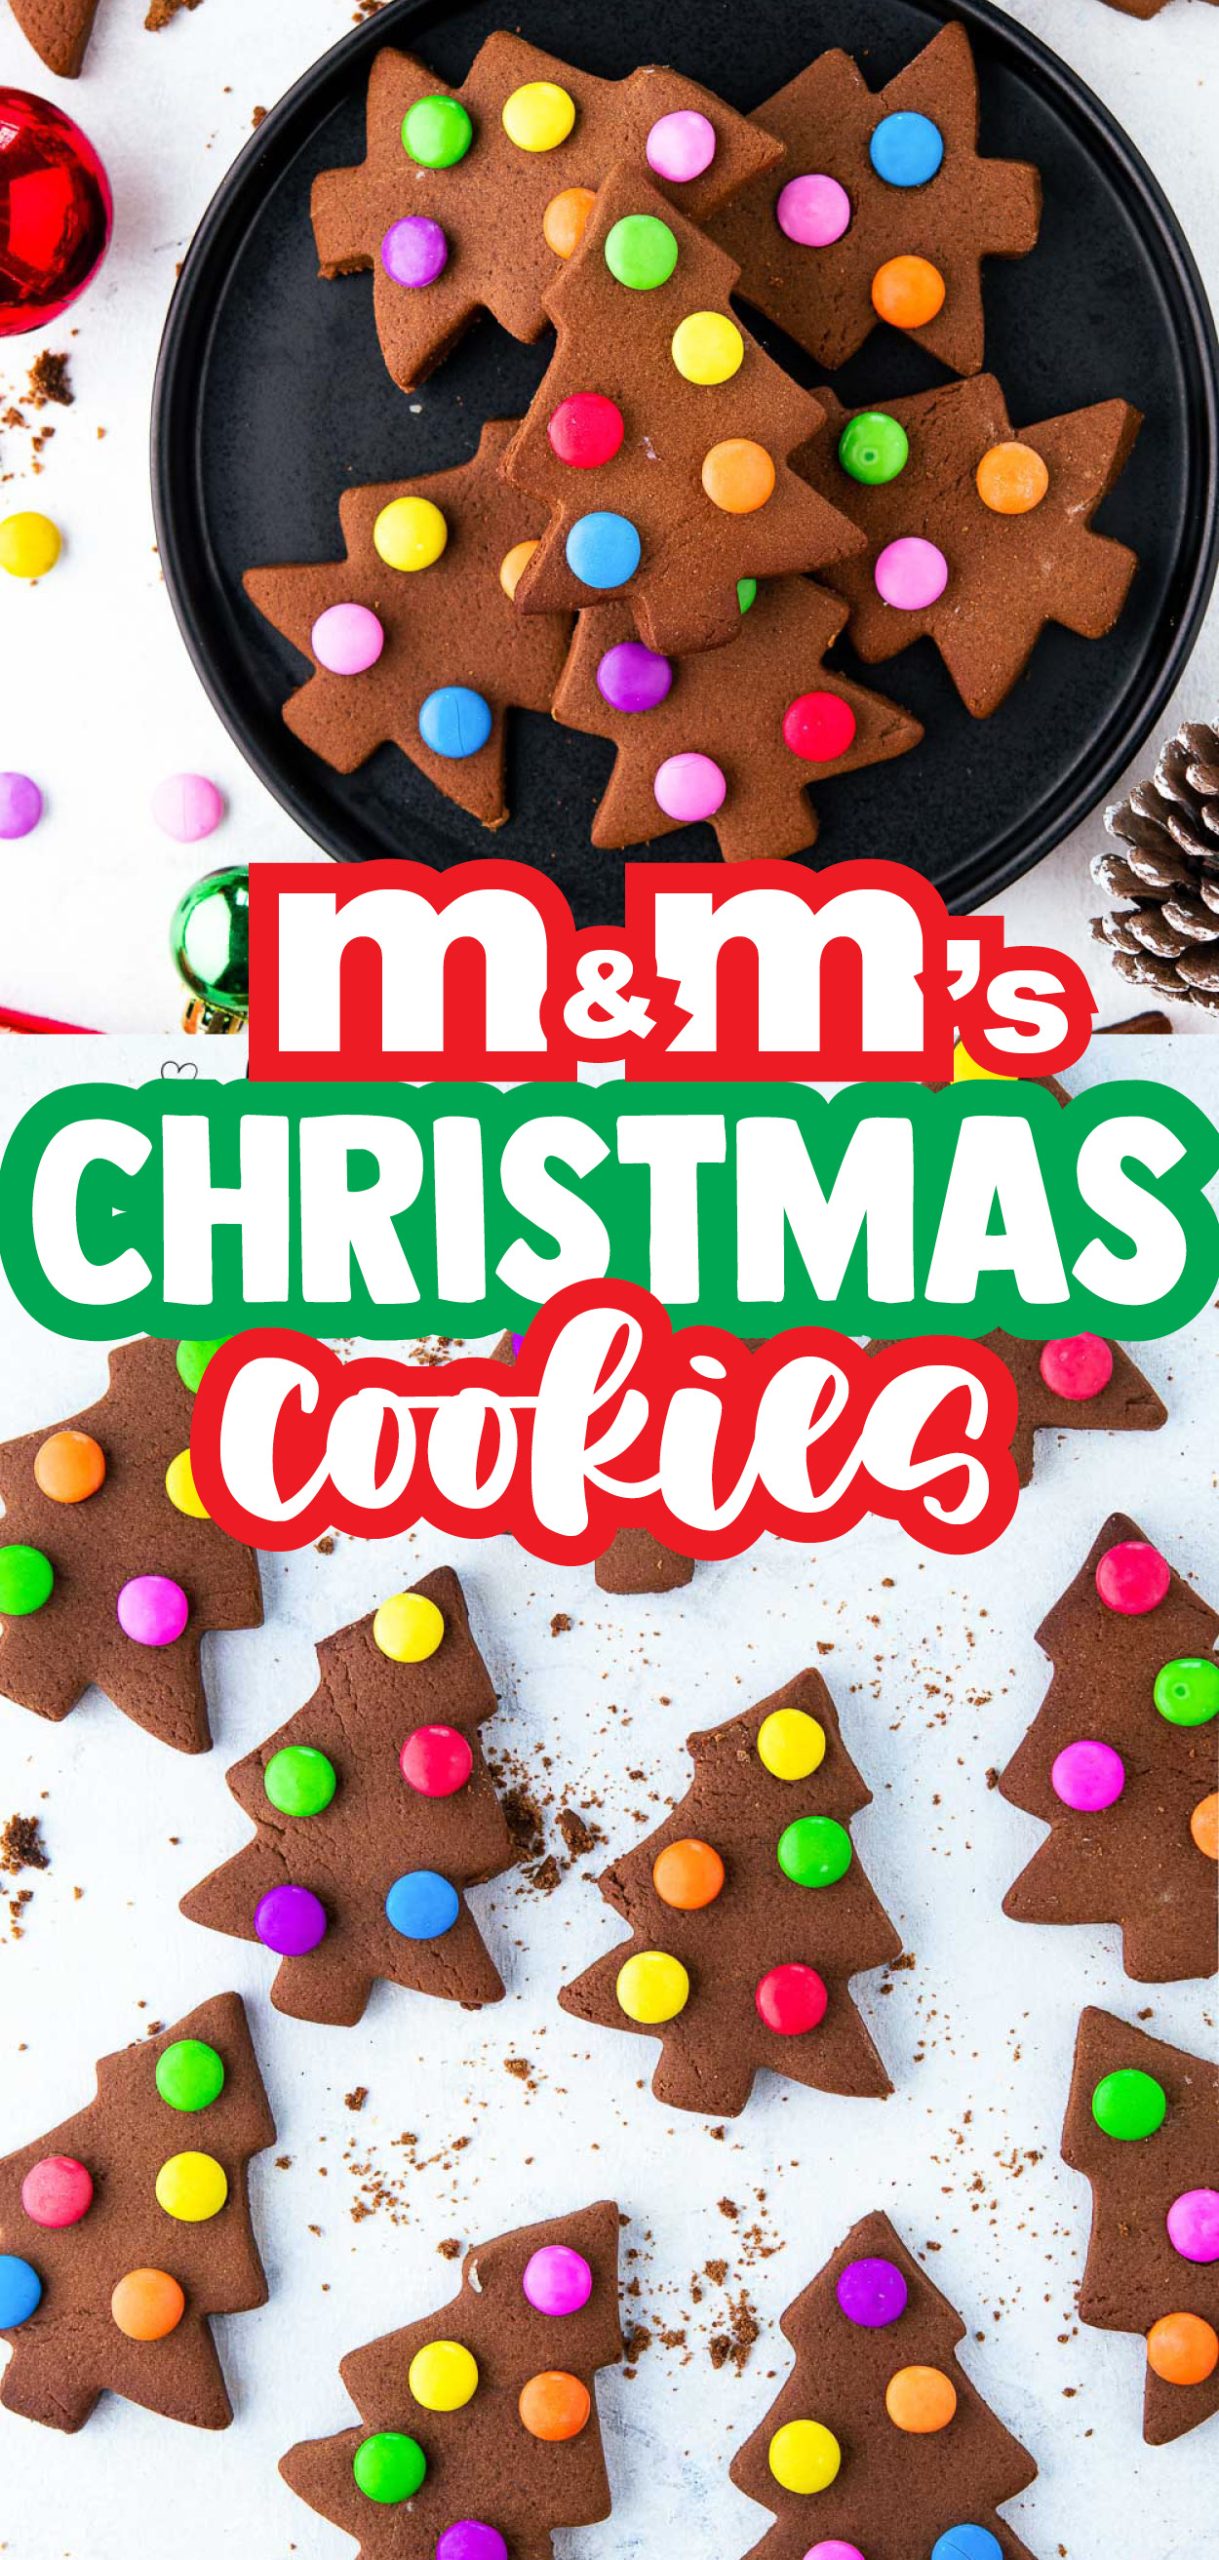 These creative, adorable, and fun Christmas tree cookies with M&M lights are super easy to make. The combination of cocoa powder and pumpkin spice mix gives these cookies a rich, decadent, and warm flavor, perfect for the holiday season.